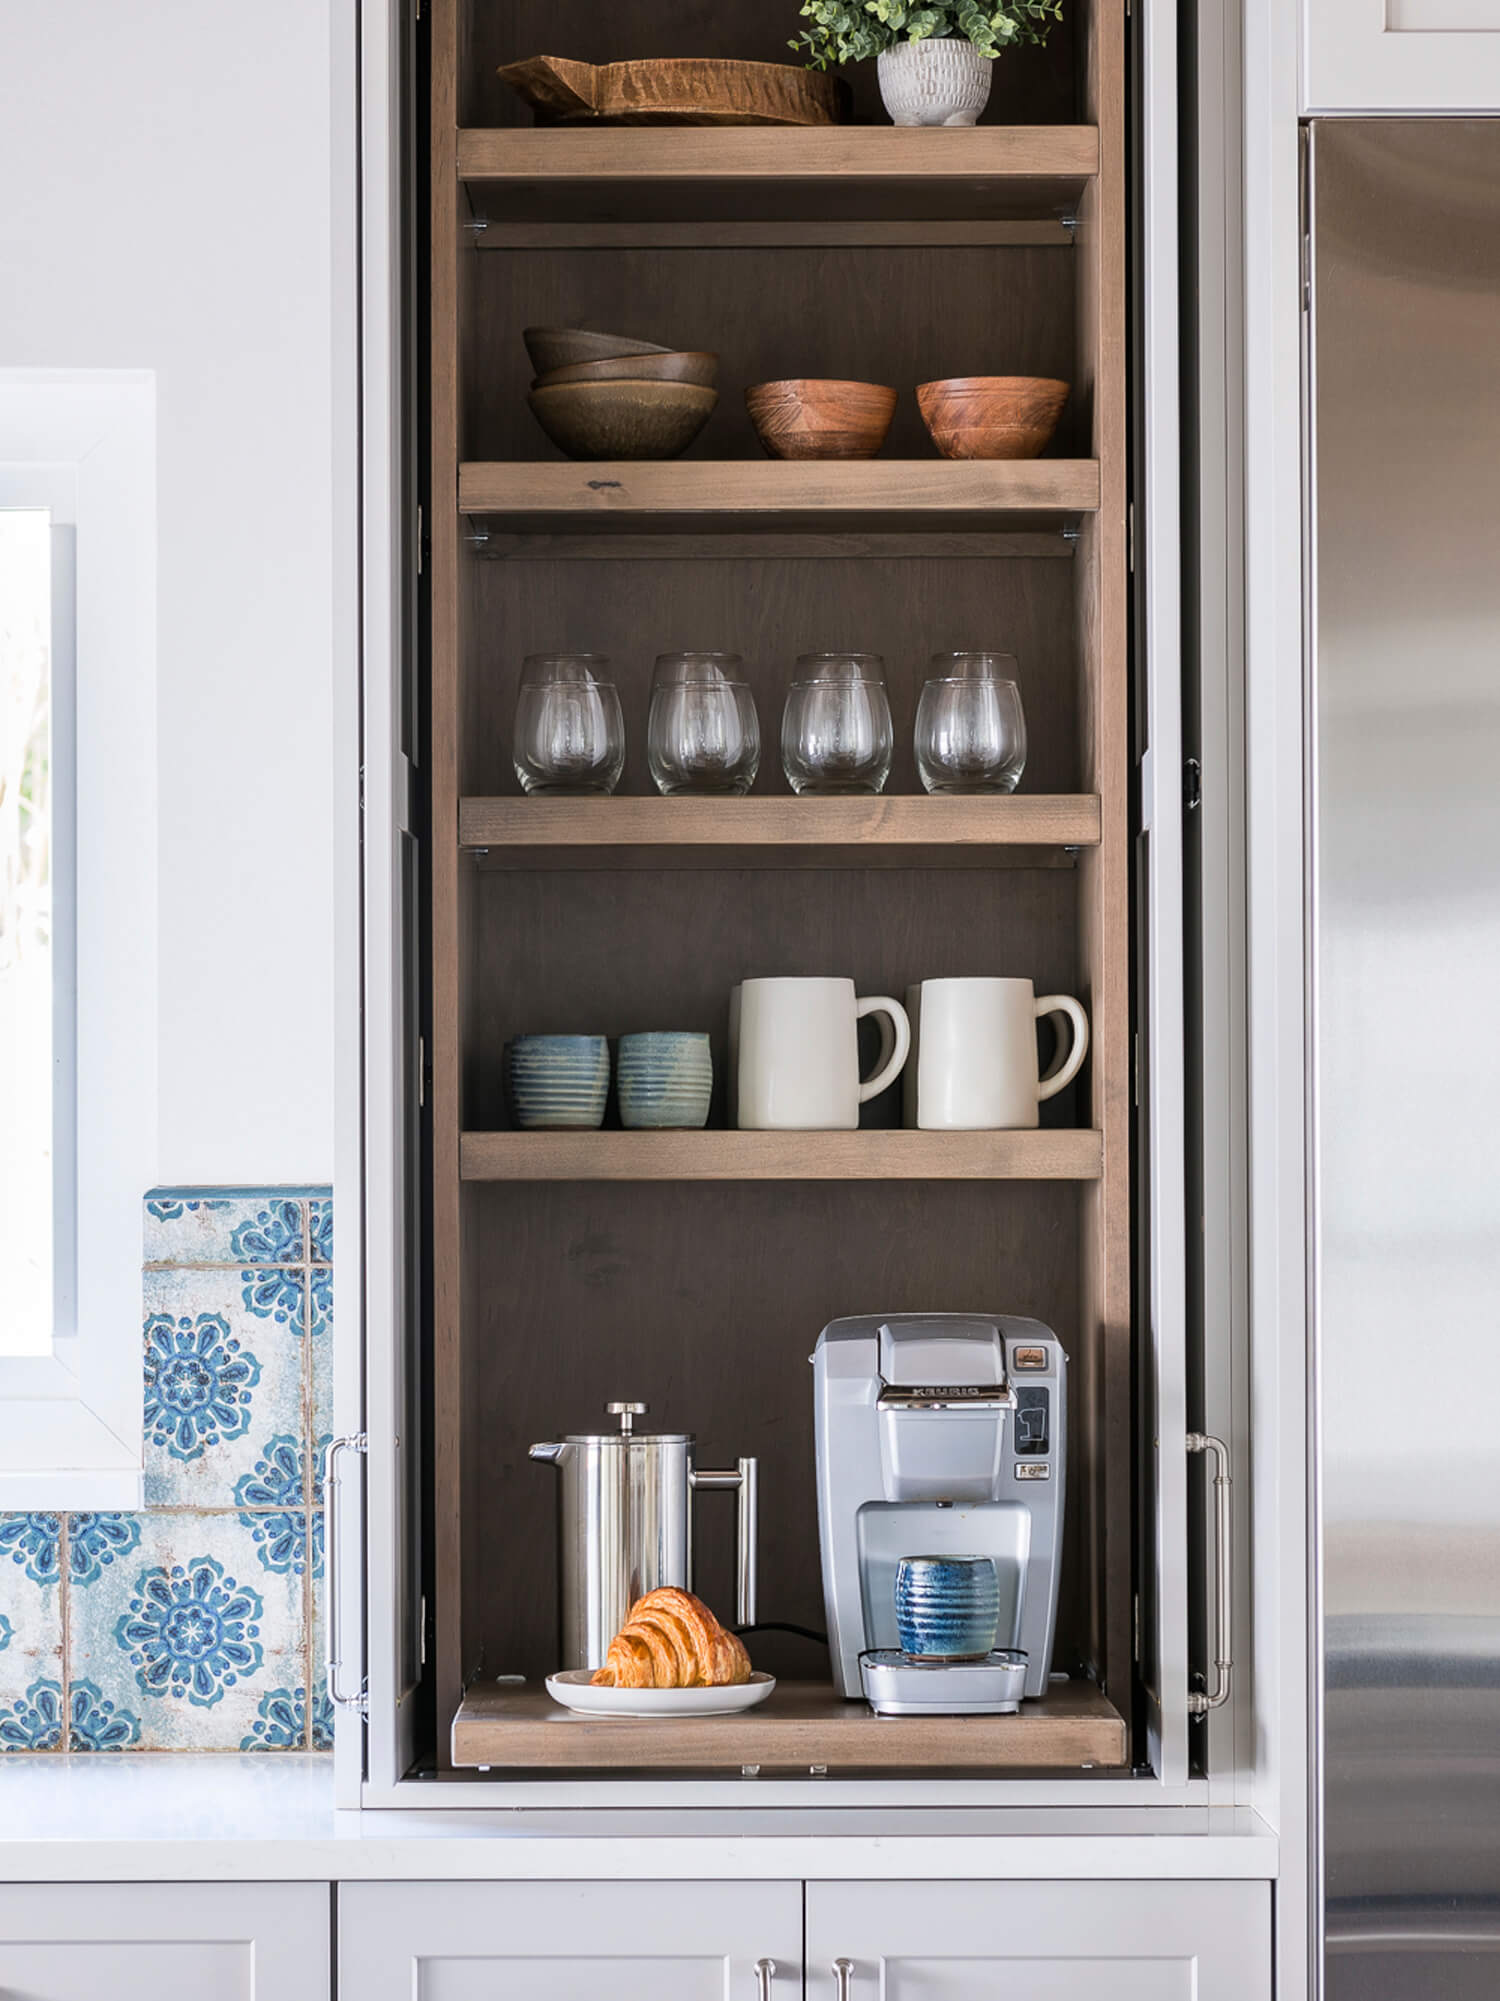 Larder Cabinets: From the History Books to the Newest Kitchen Design ...